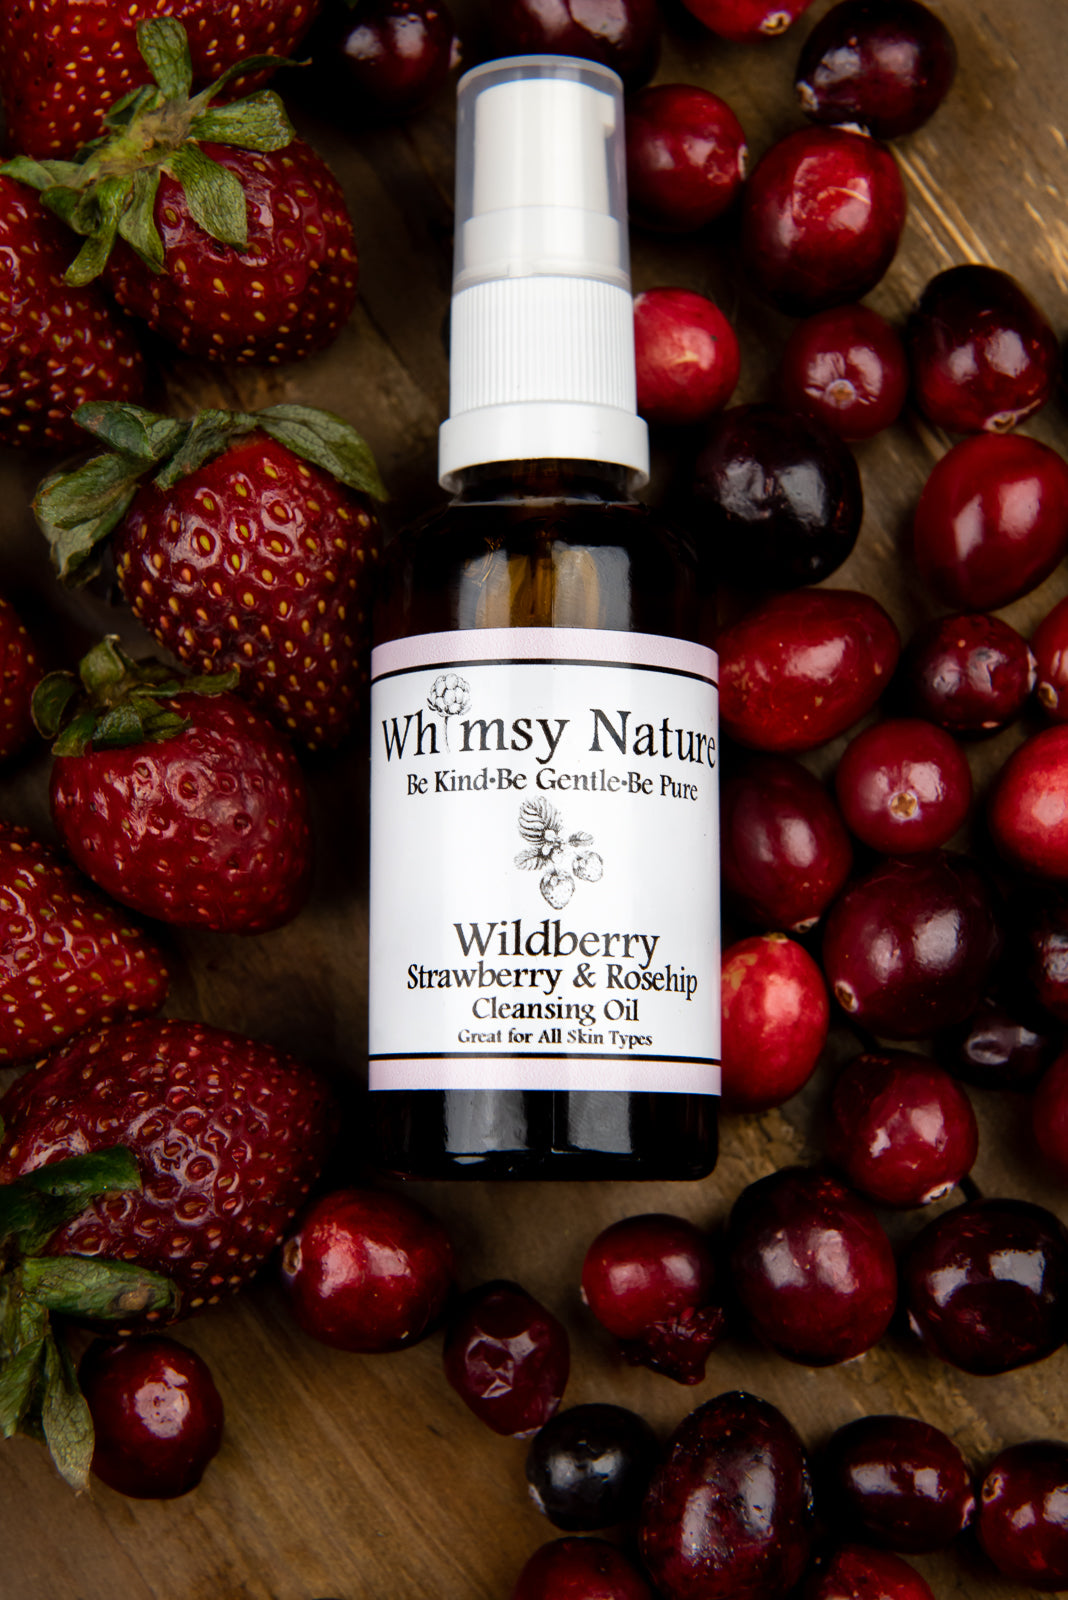  Wildberries: Our Products